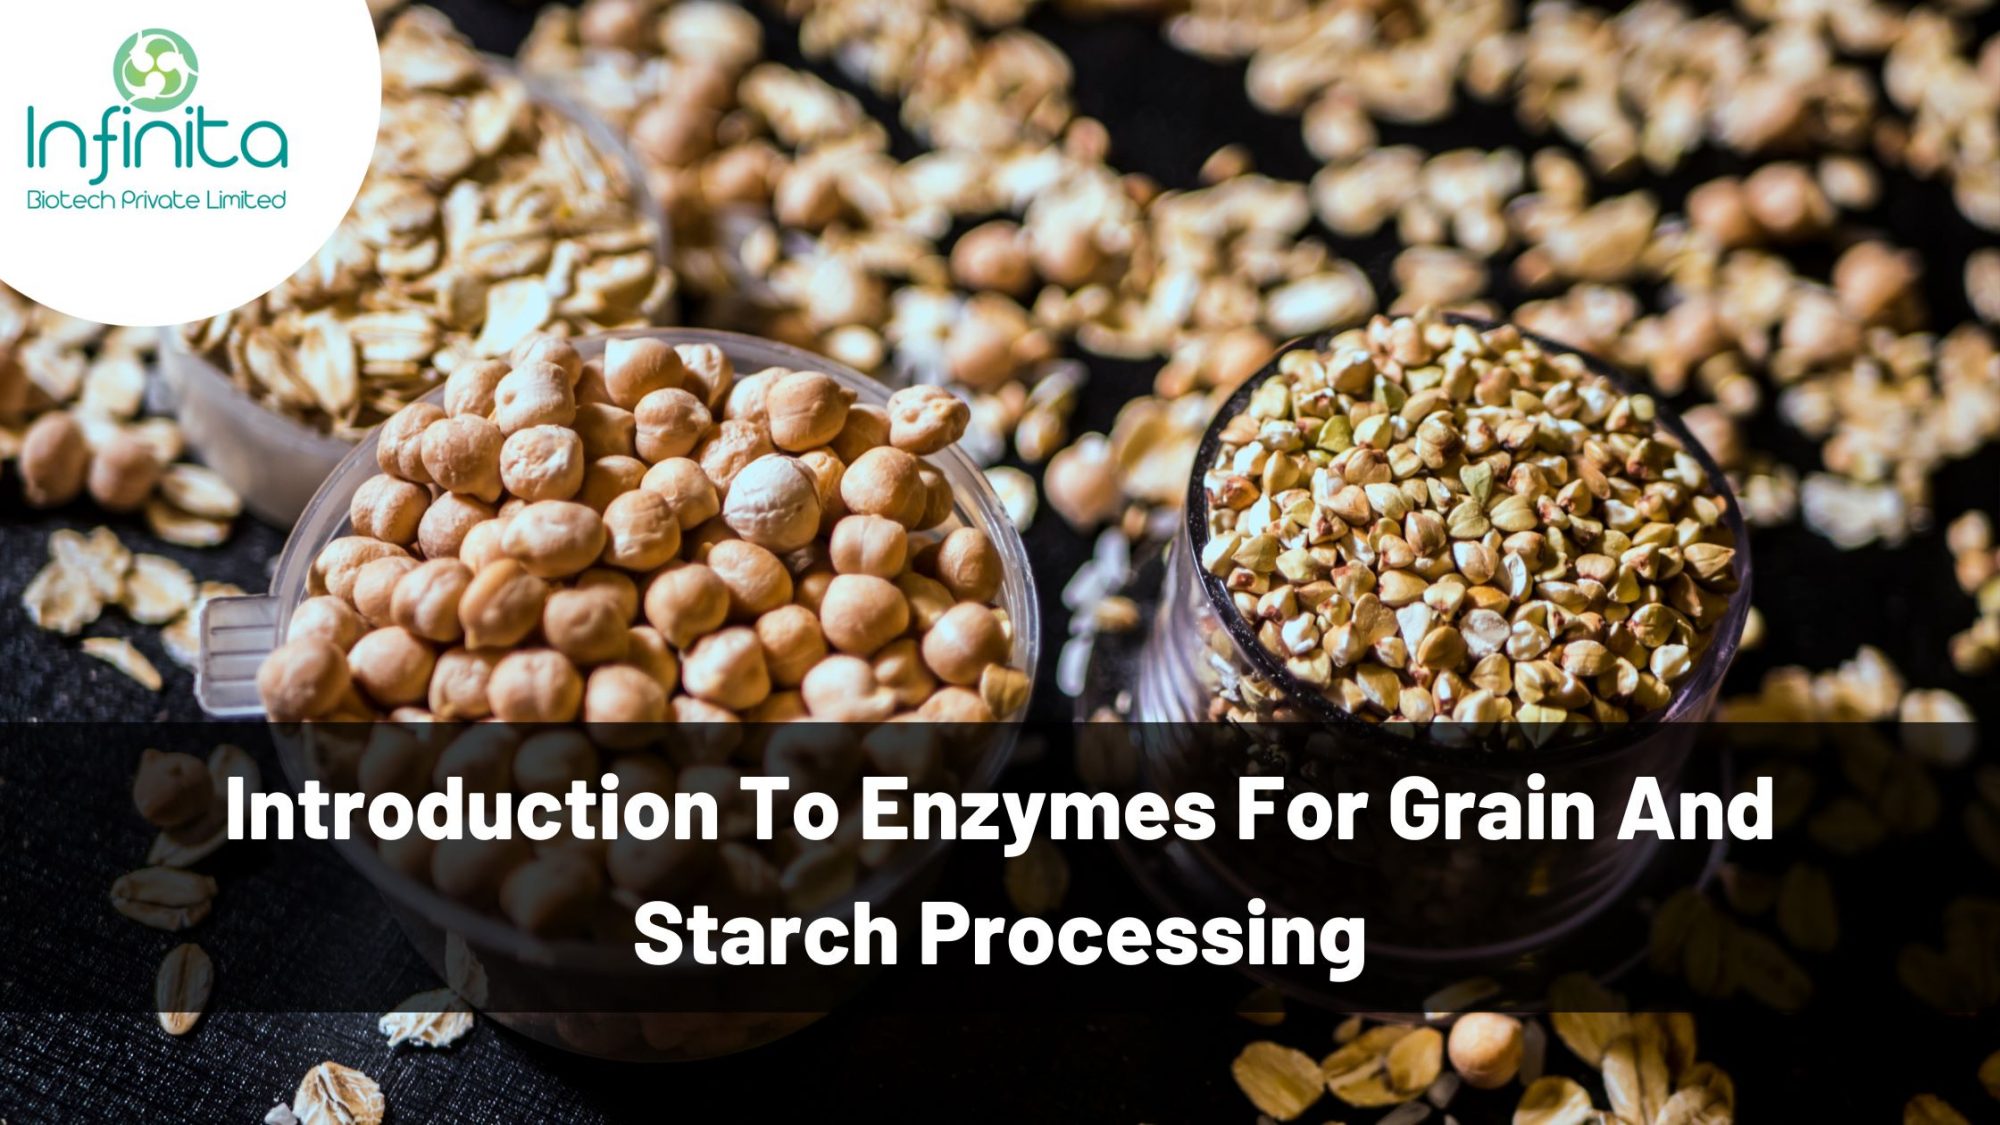 Starch Processing Enzymes